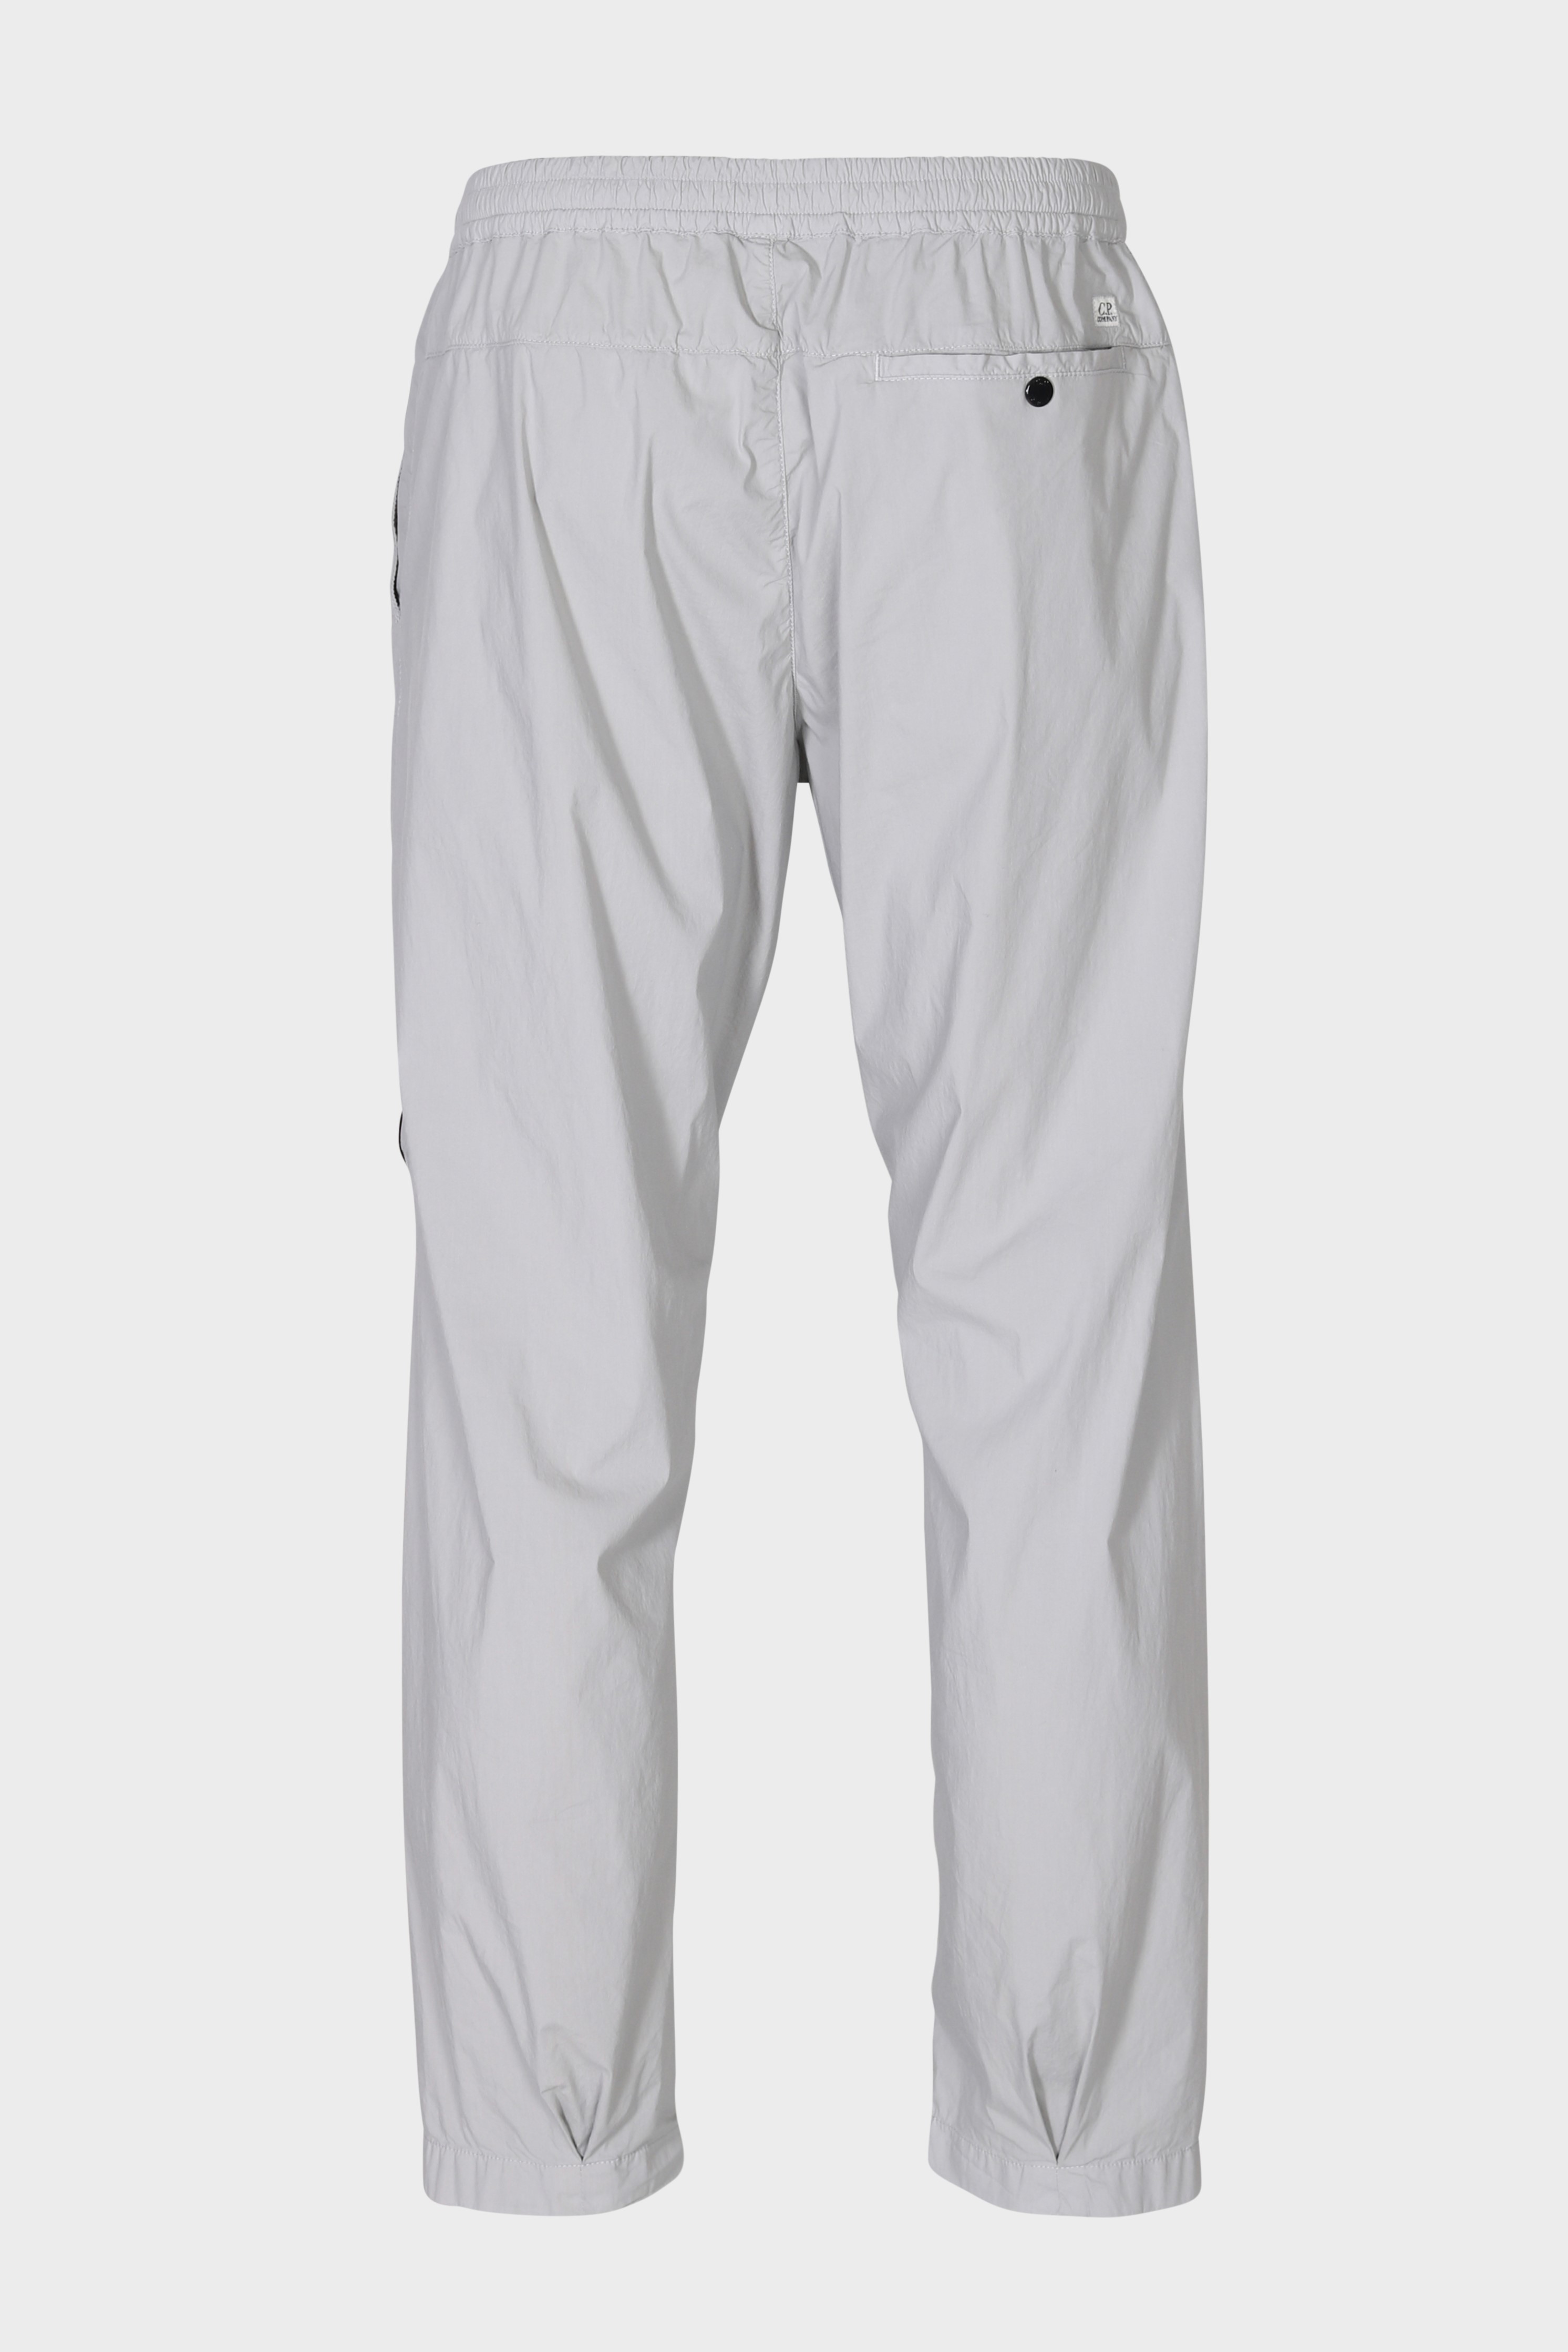 C.P. COMPANY Cargo Pant in Drizzle Grey